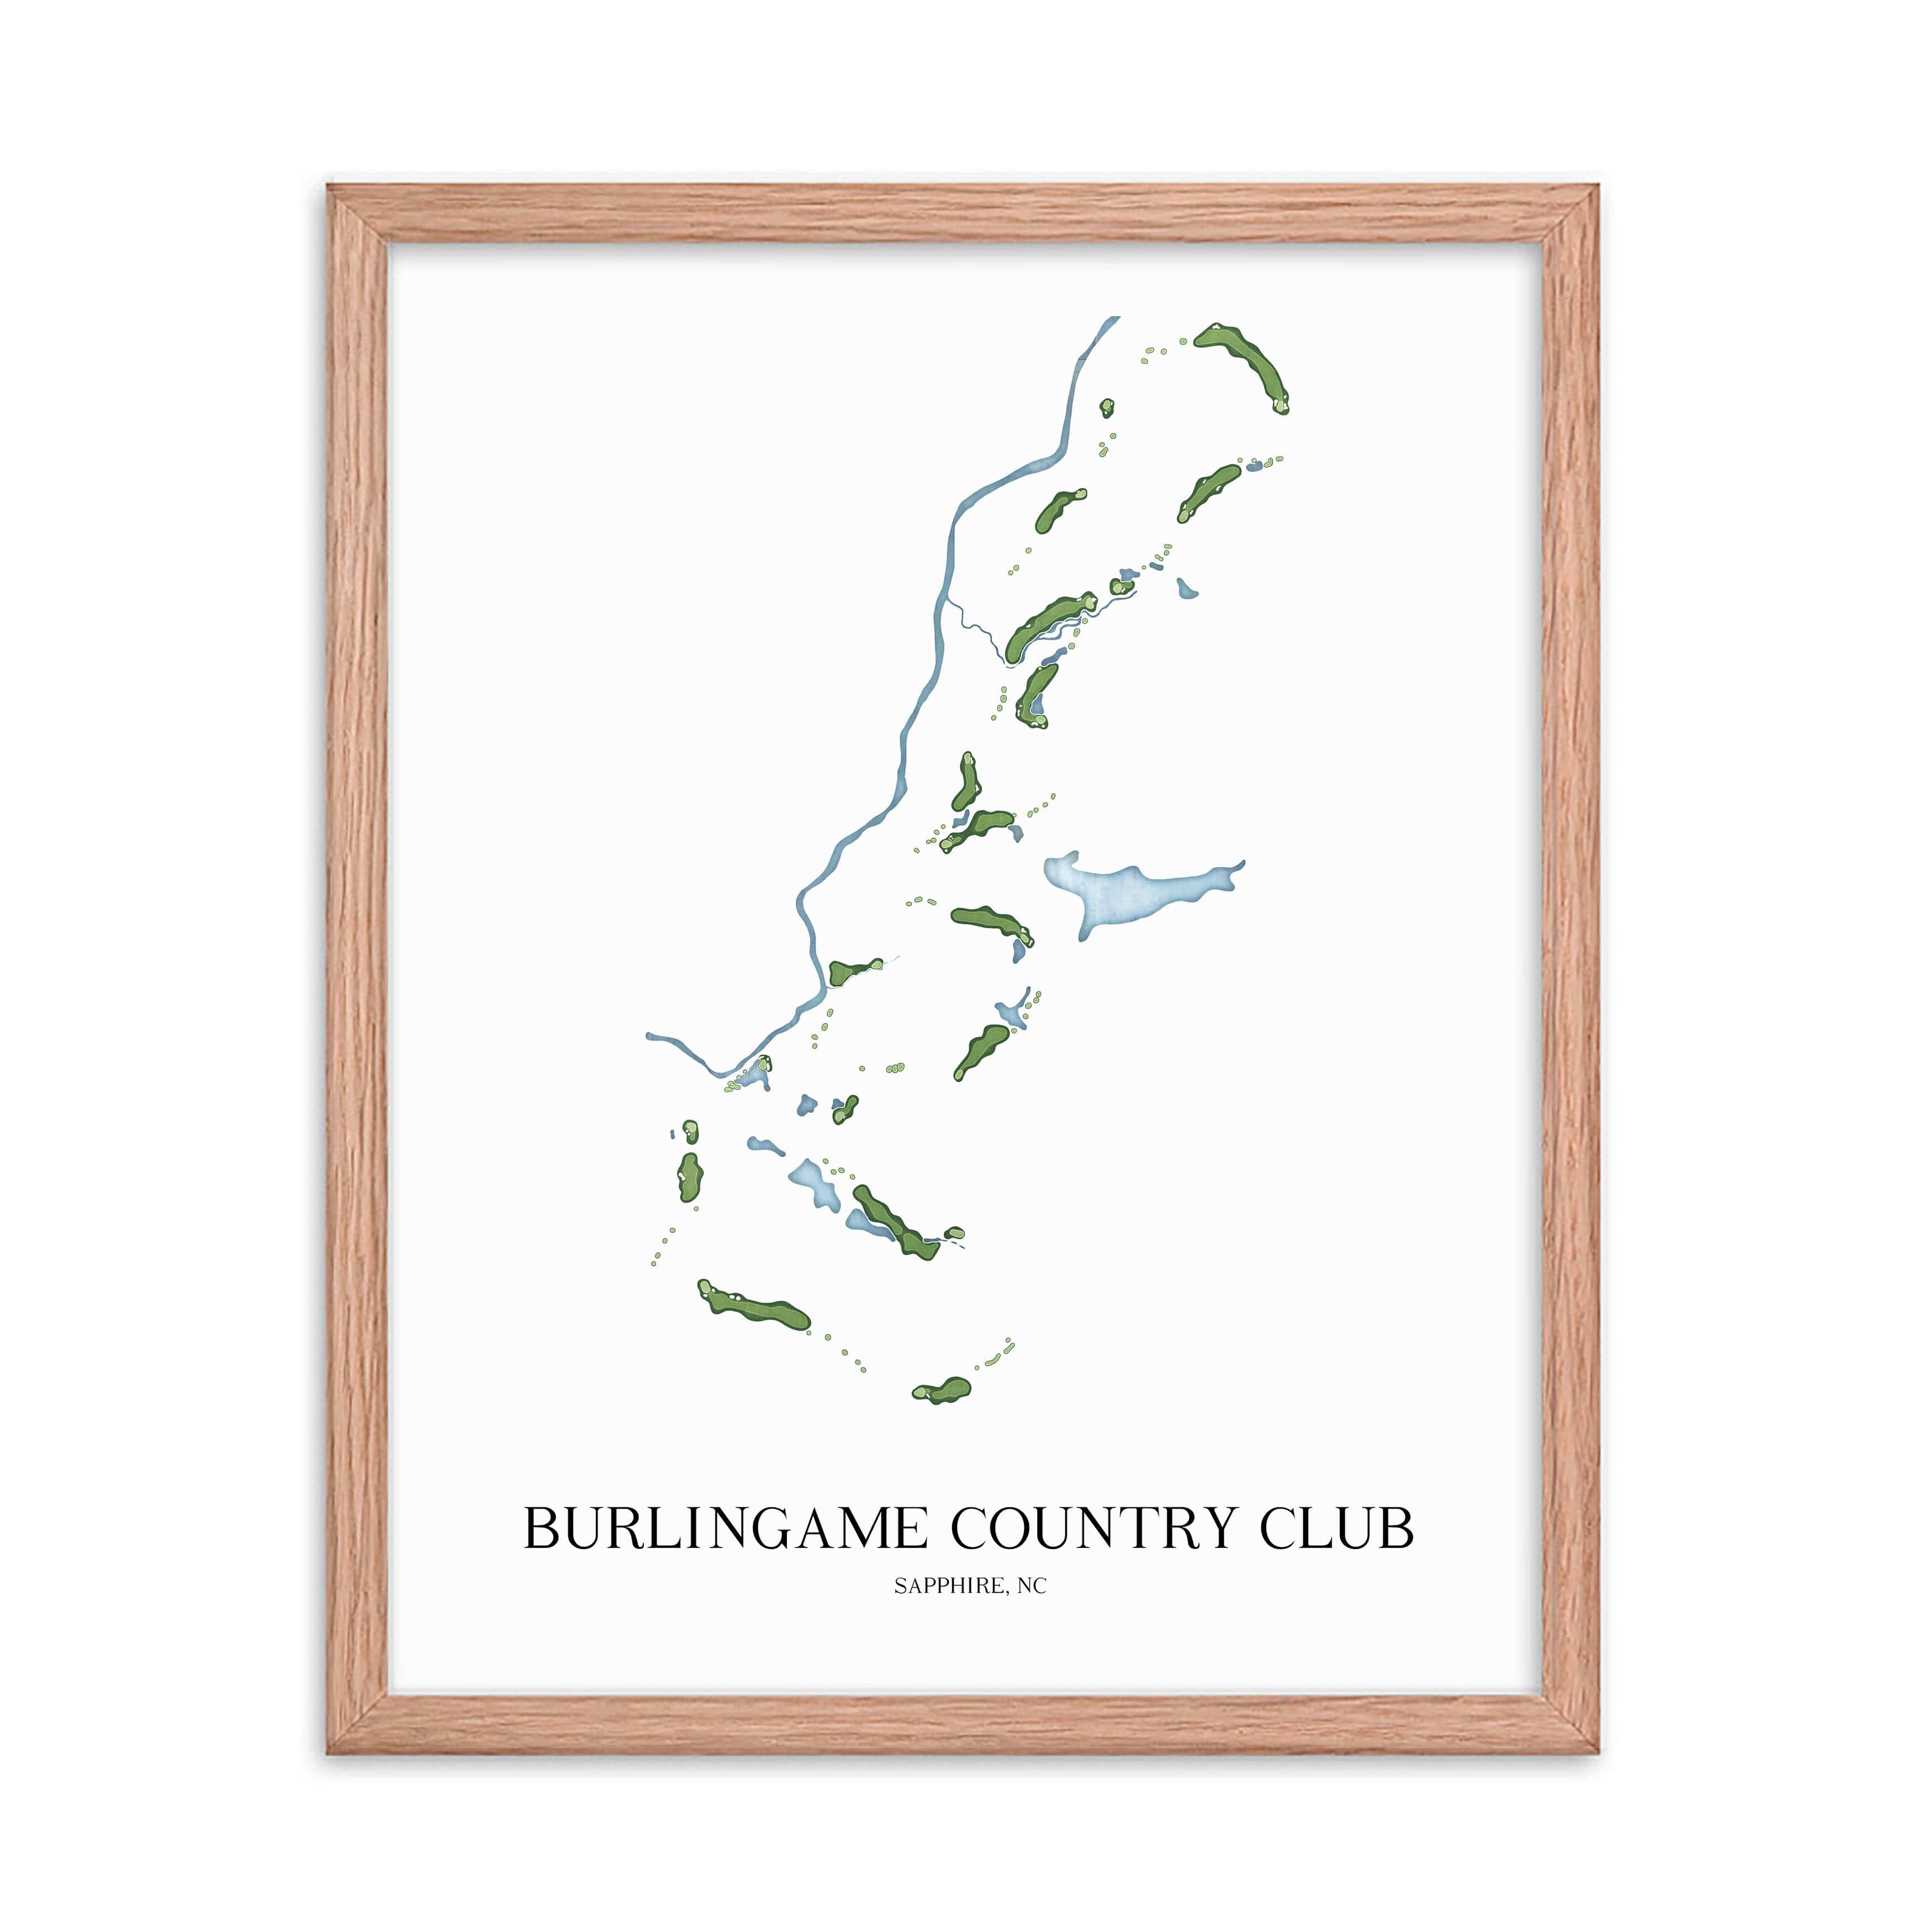 The 19th Hole Golf Shop - Golf Course Prints -  Burlingame Country Club Golf Course Map